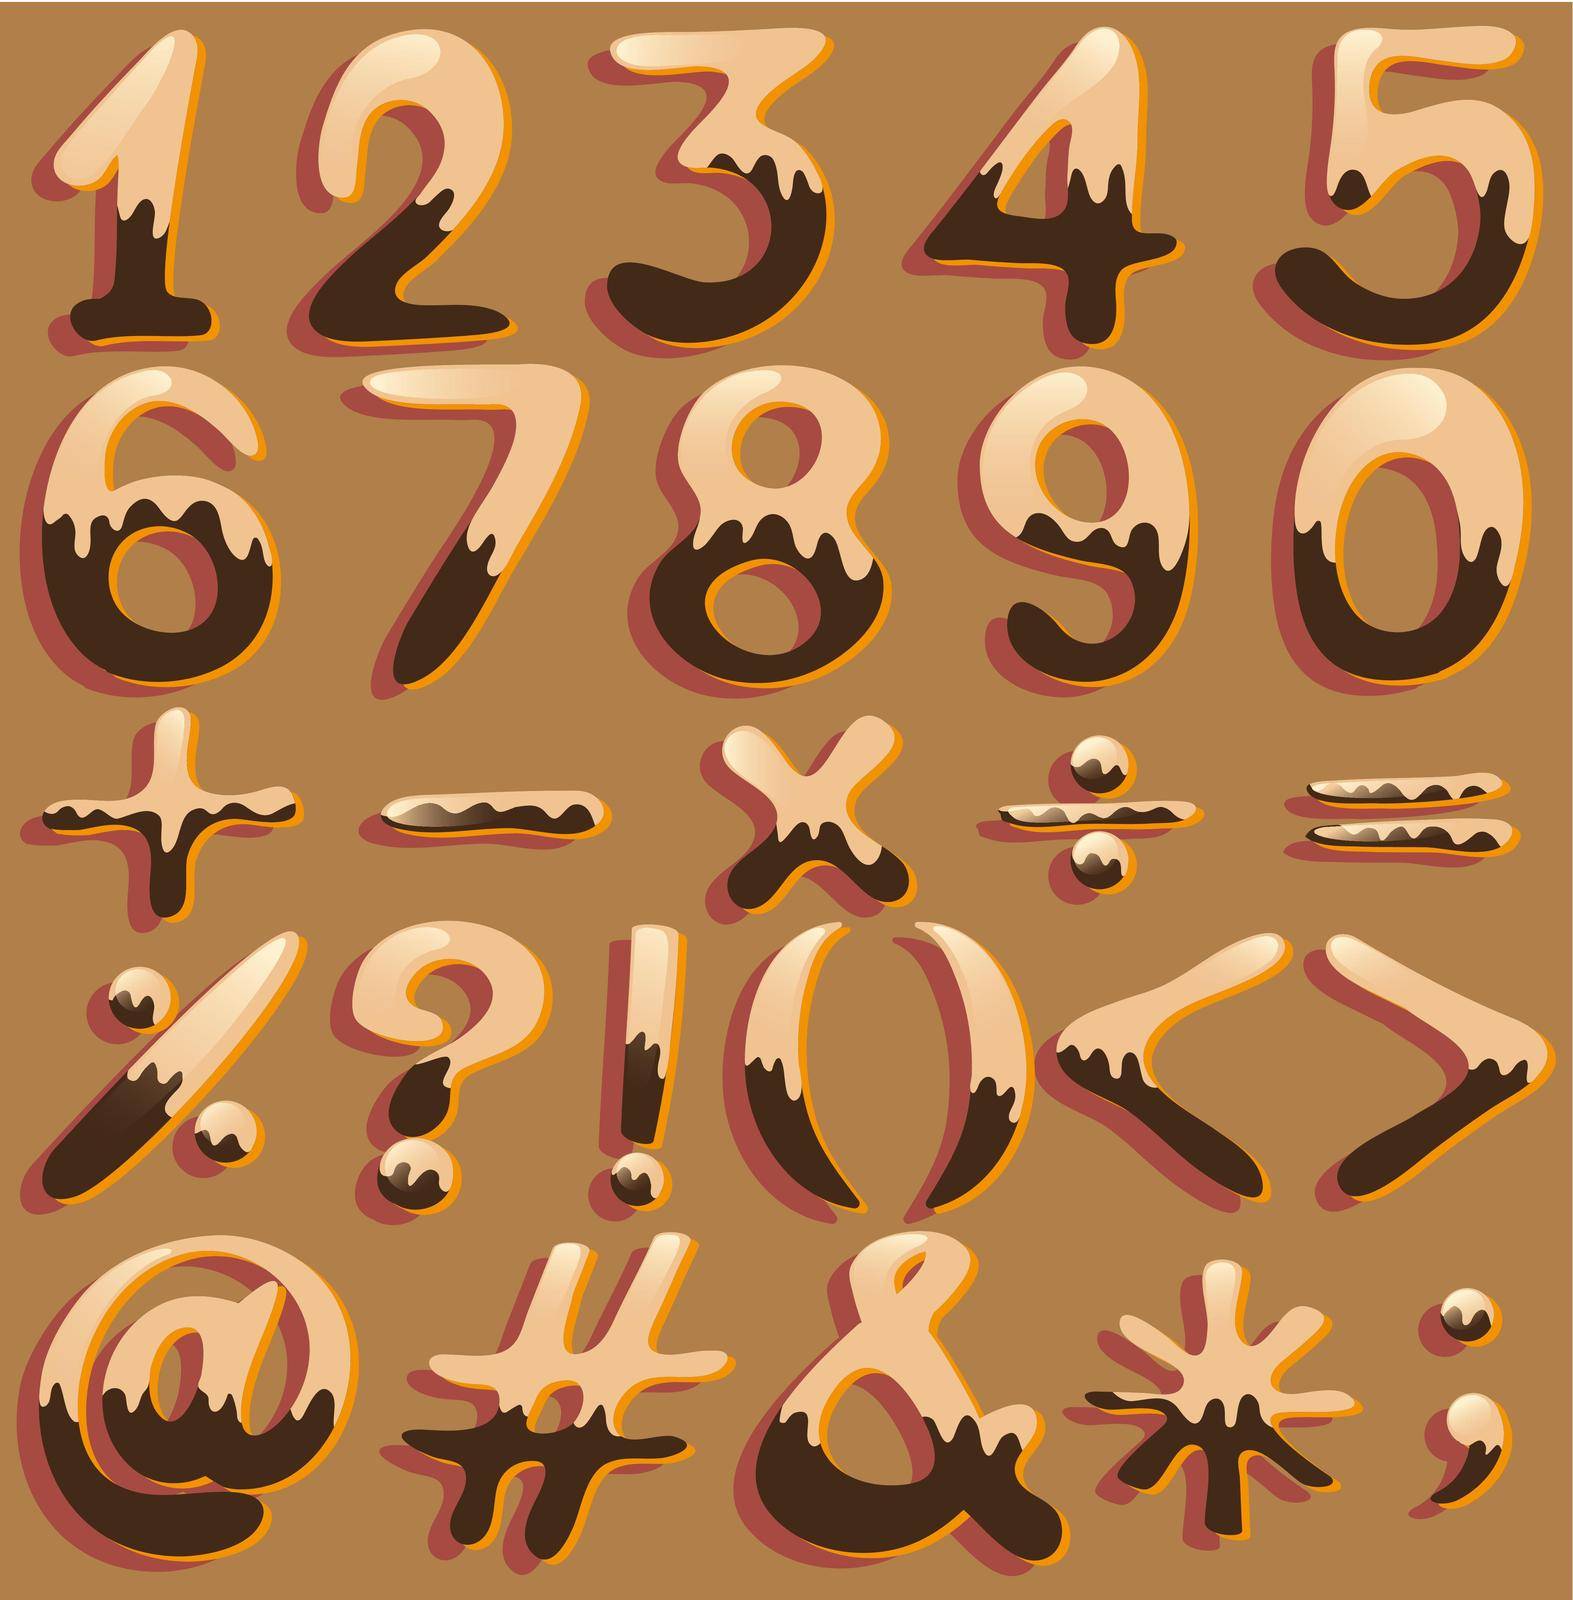 Numerical figures and signs by iimages